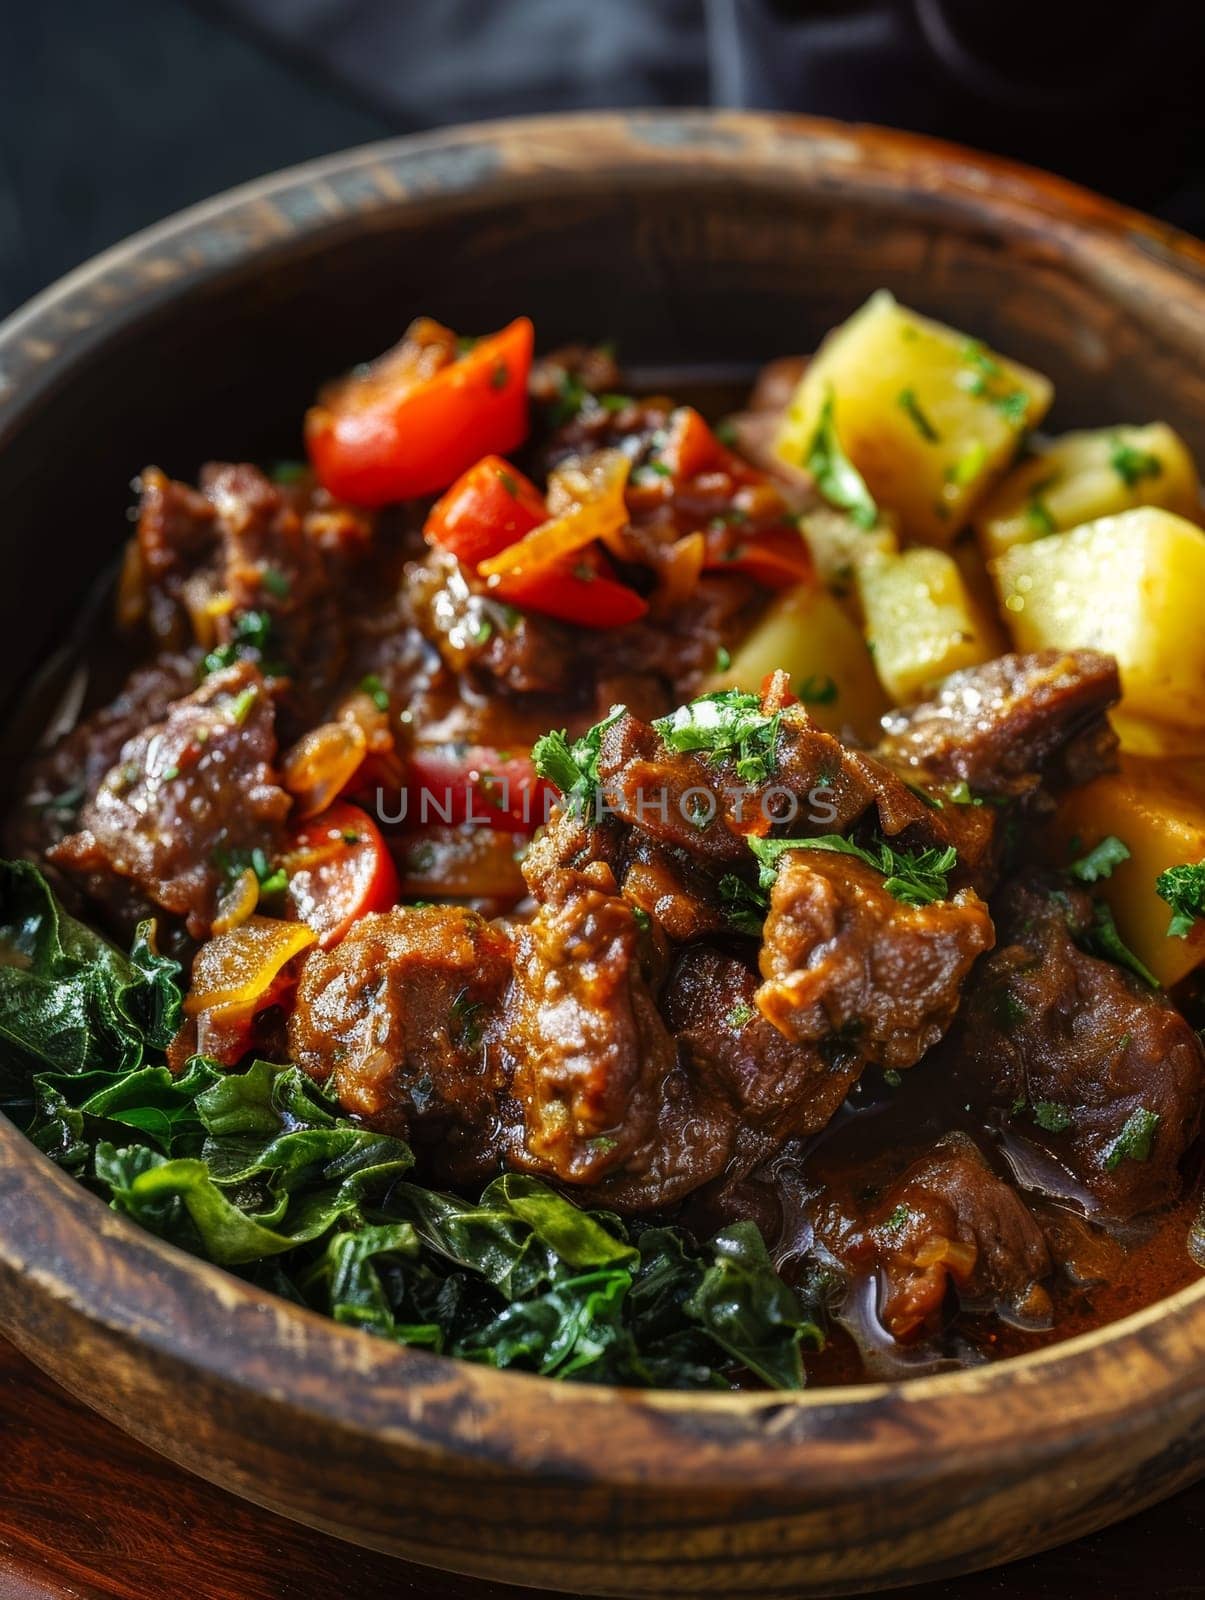 Zimbabwean sadza in a wooden bowl, with a side of greens and meat stew. A traditional and hearty dish from Zimbabwe